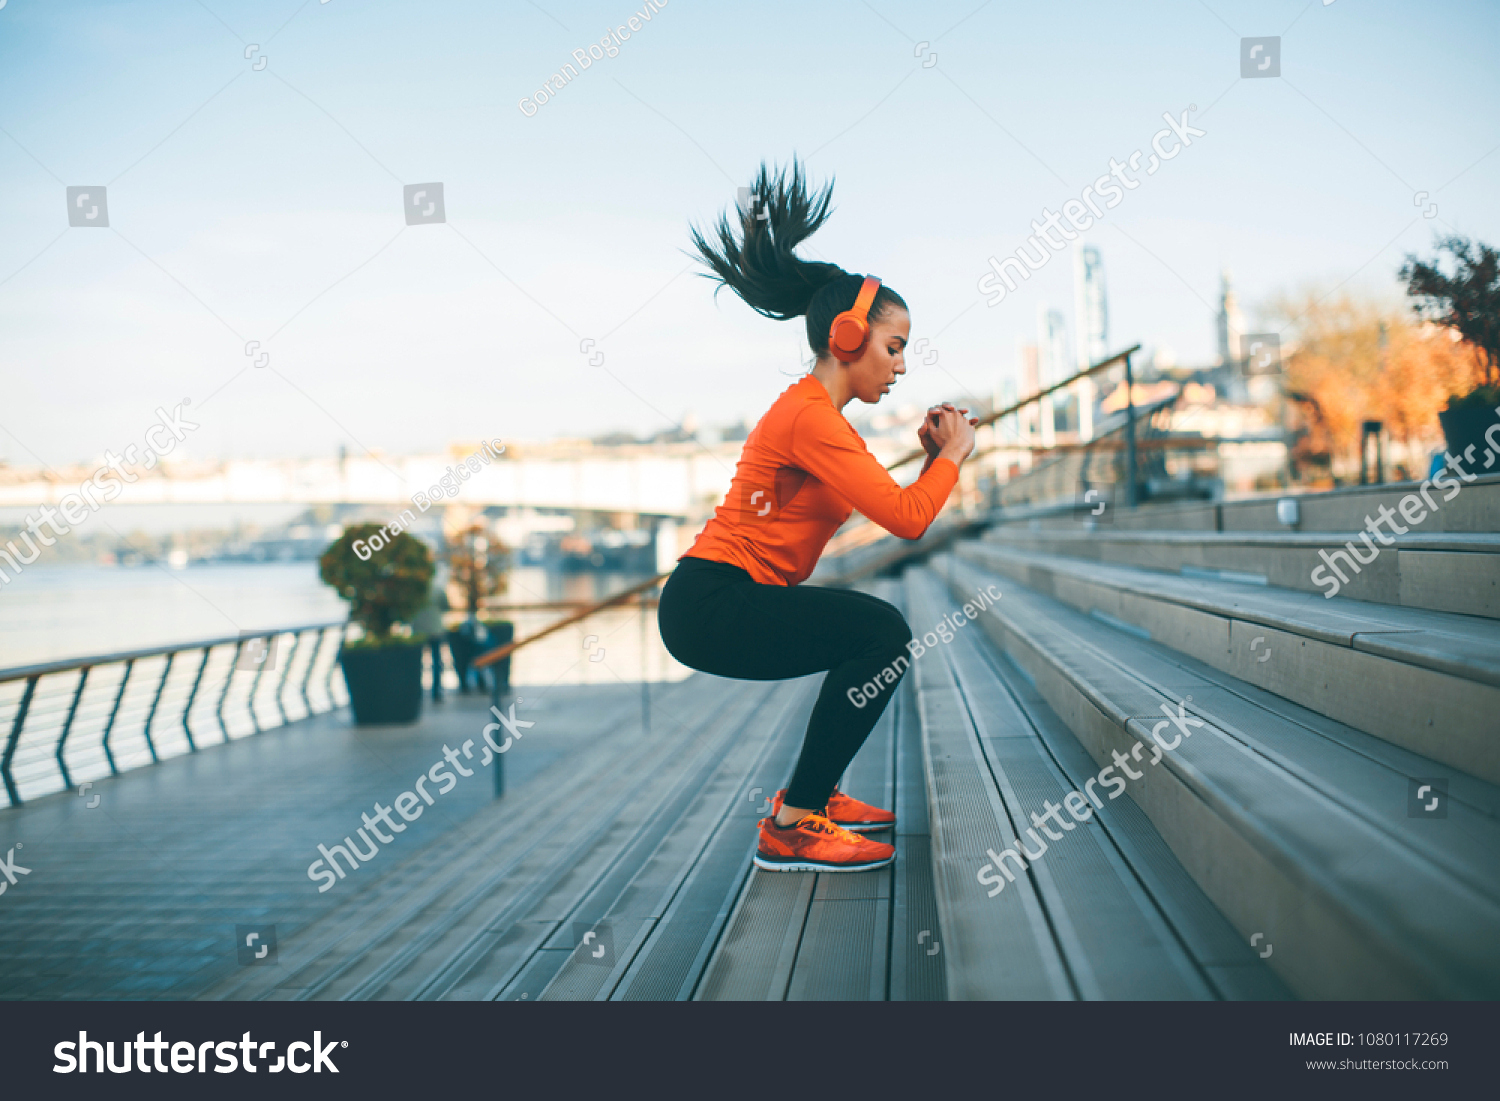 Fitness woman jumping outdoor in urban environment #1080117269